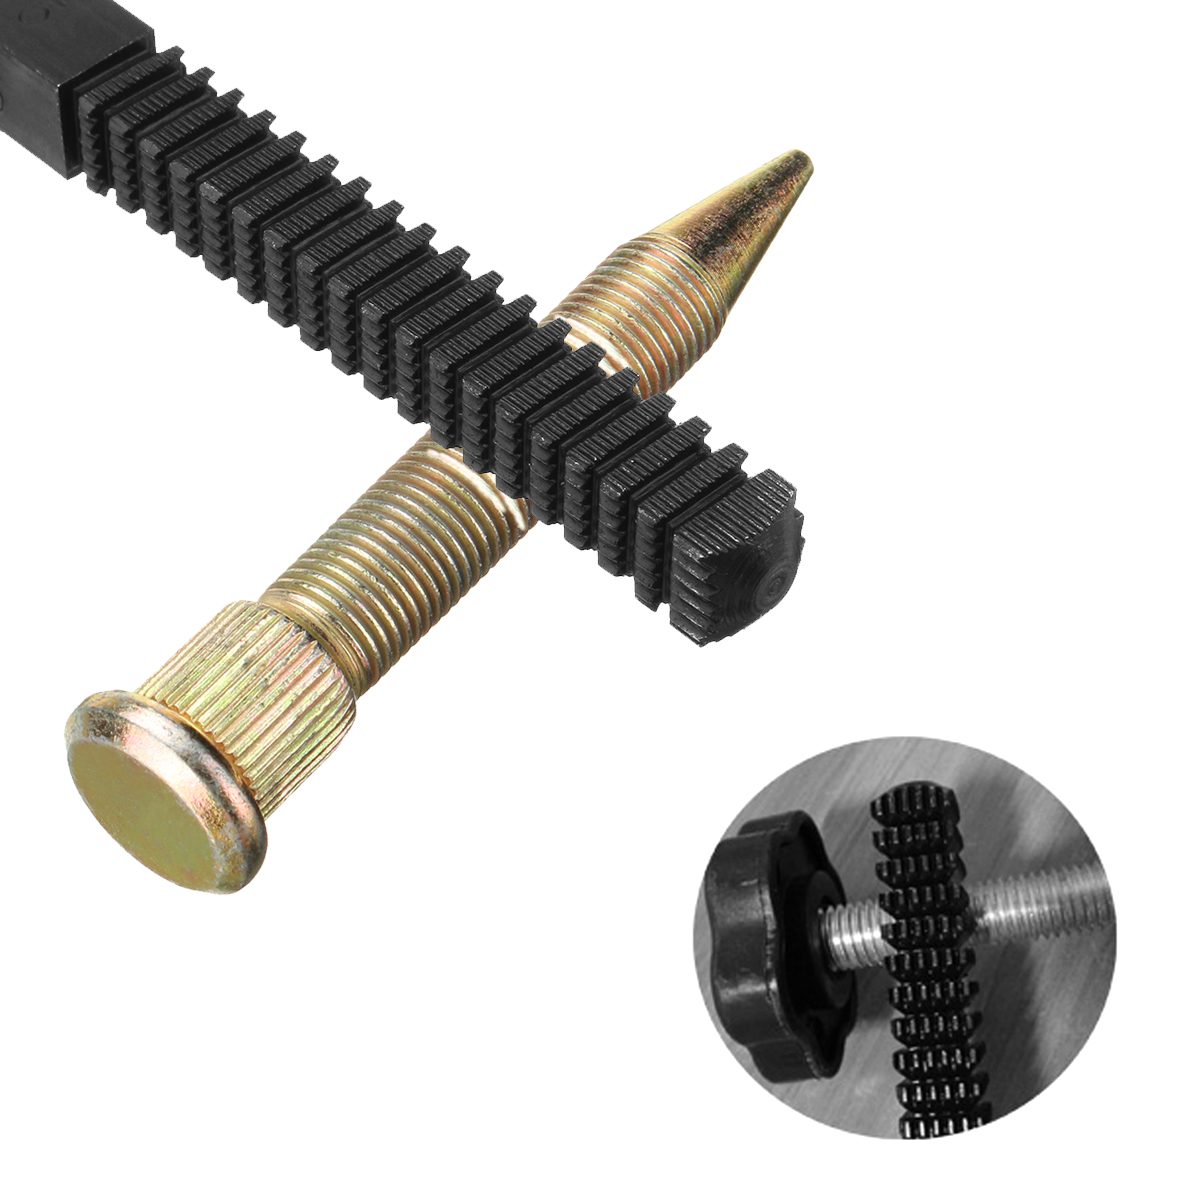 Metric-Thread-Repair-Tool-Restoration-File-Damaged-Threads-075-to-3mm-Pitch-1424557-4